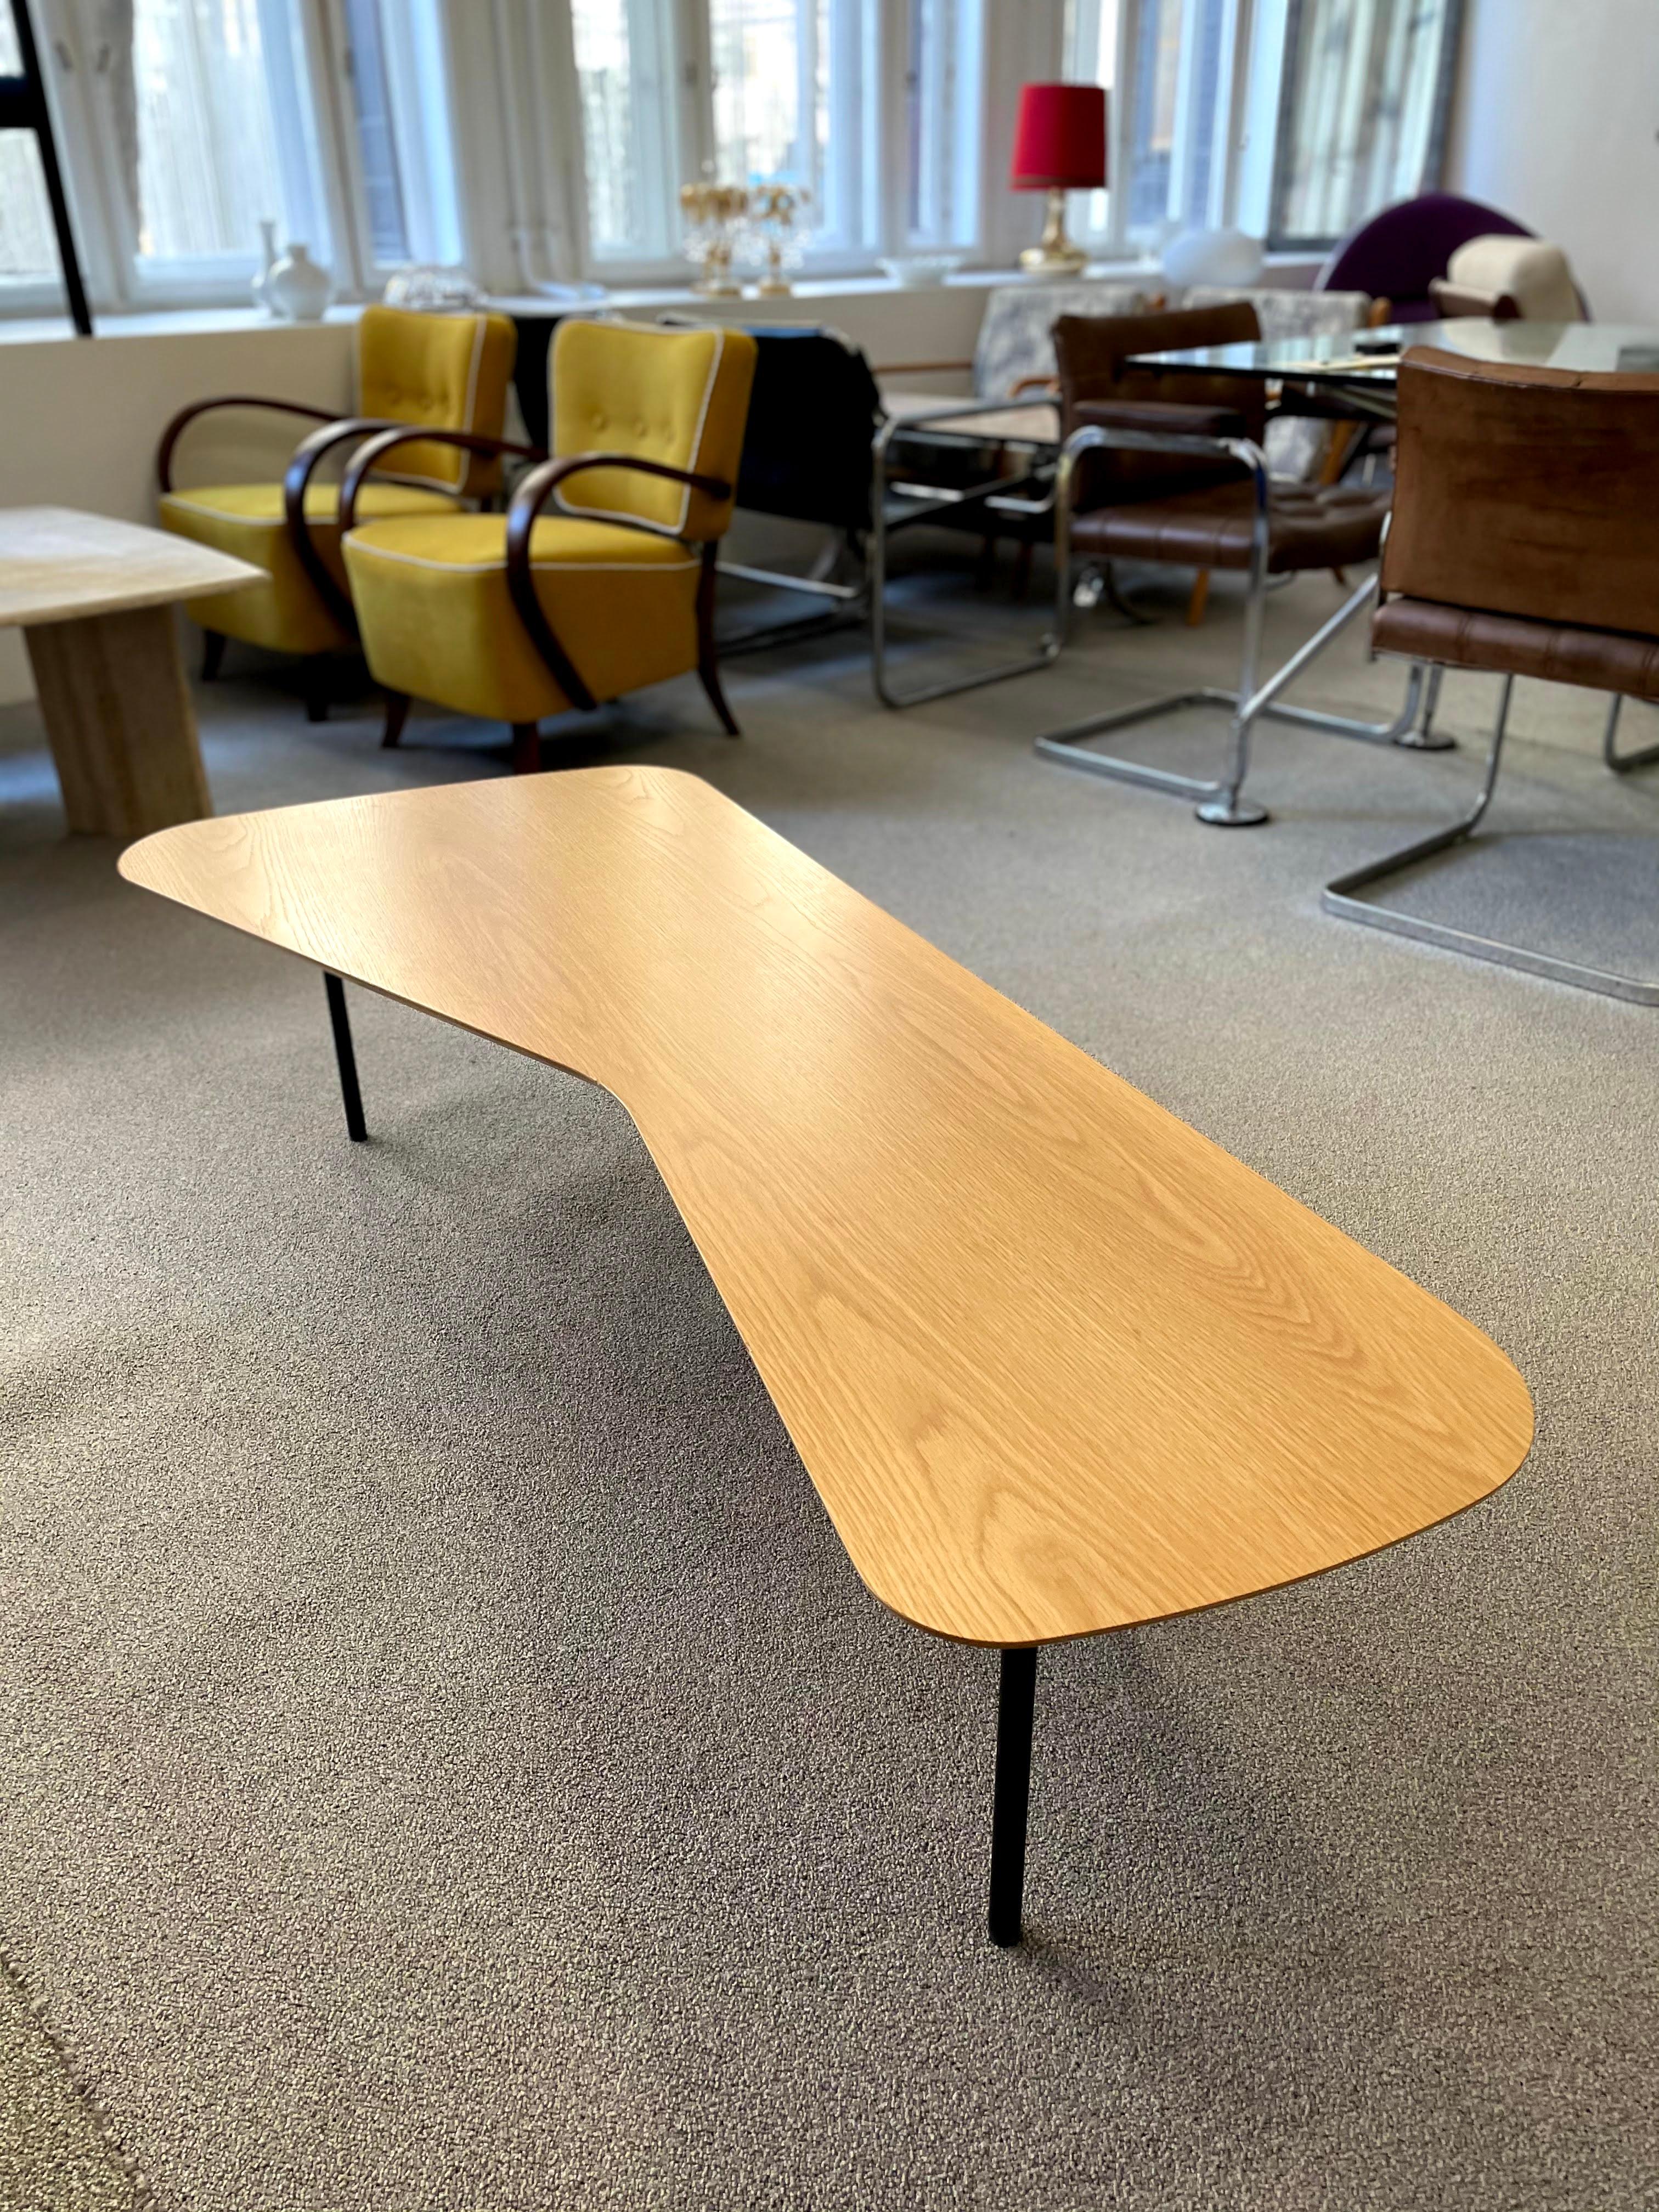 The Model 108 coffee table, introduced to the Knoll catalog in 1948, reflects the playful spirit he injected into the often austere modern vocabulary.